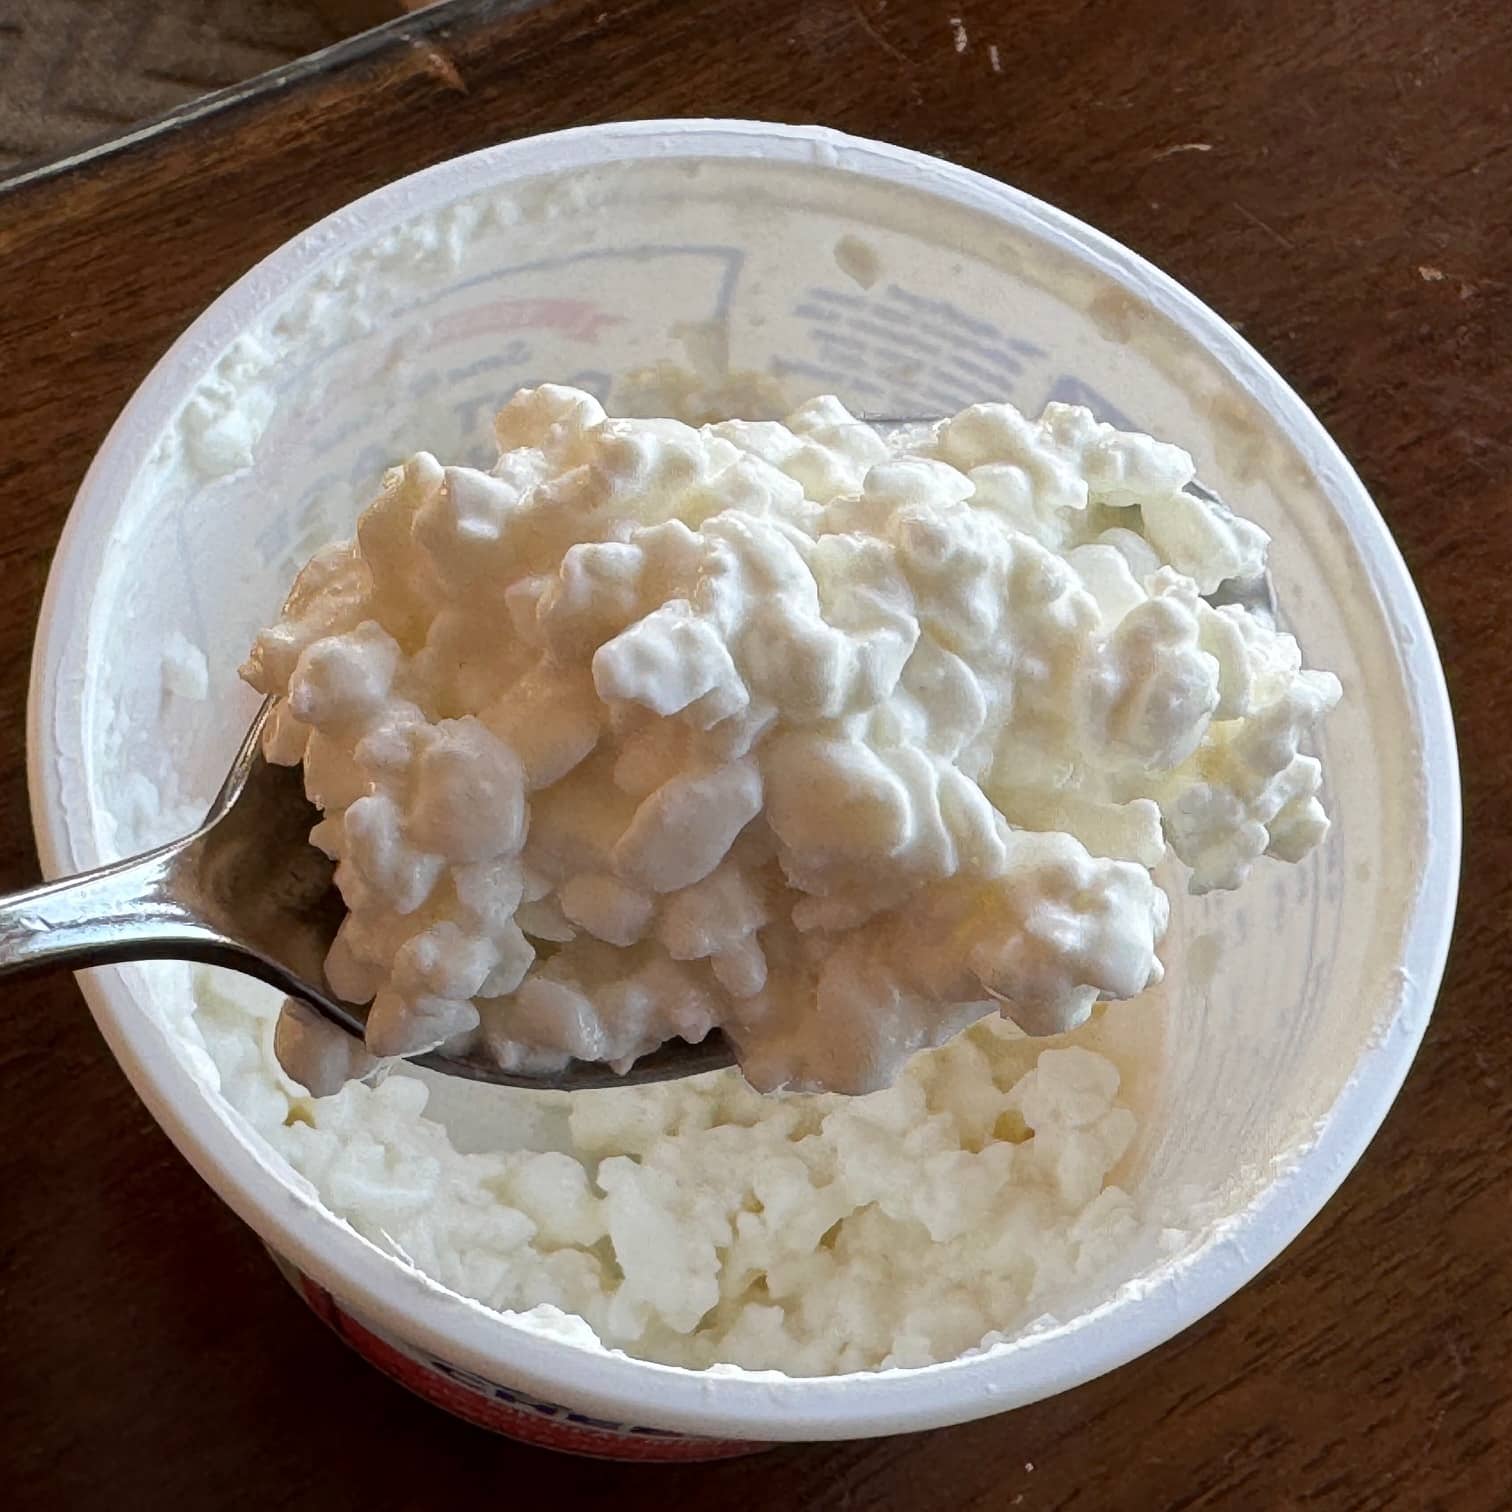 Trader Joe's' Small Curd Cottage Cheese on a spoon